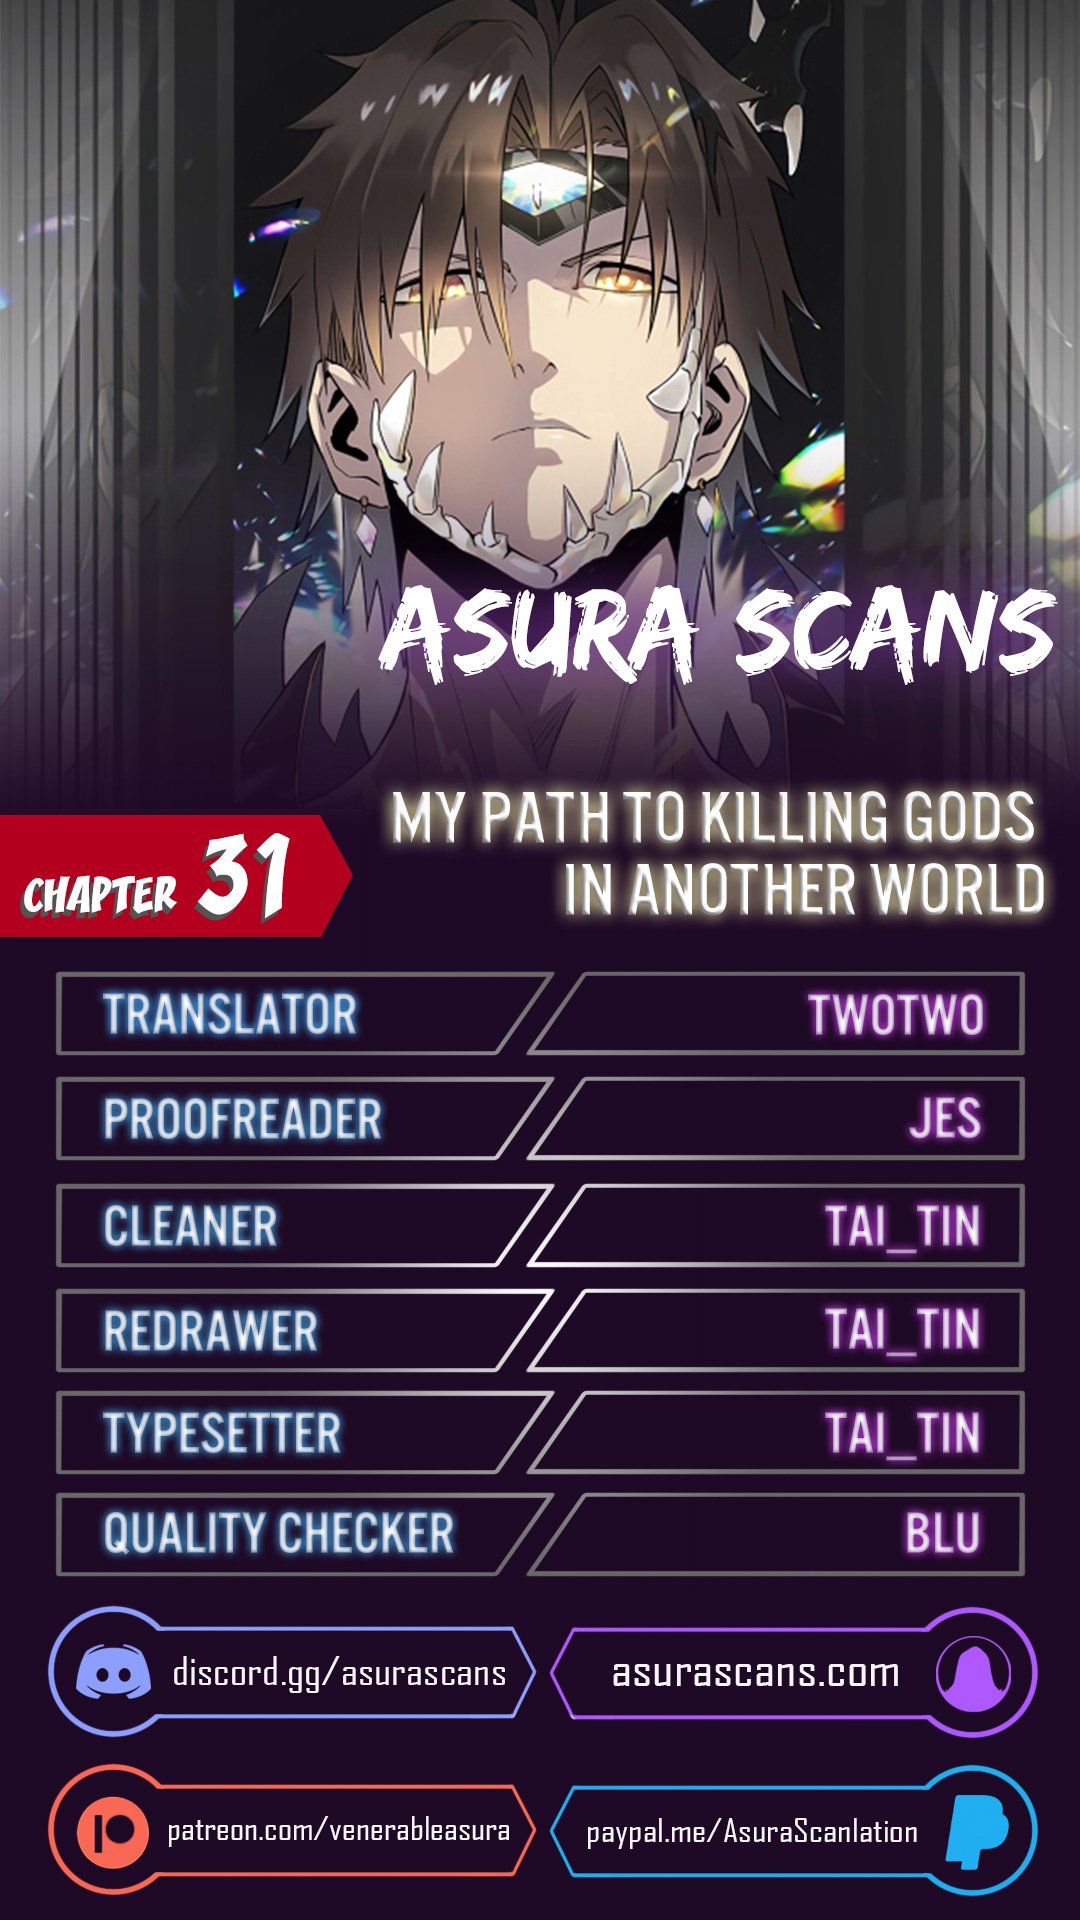 My Path to Killing Gods in Another World - Chapter 23182 - Image 1